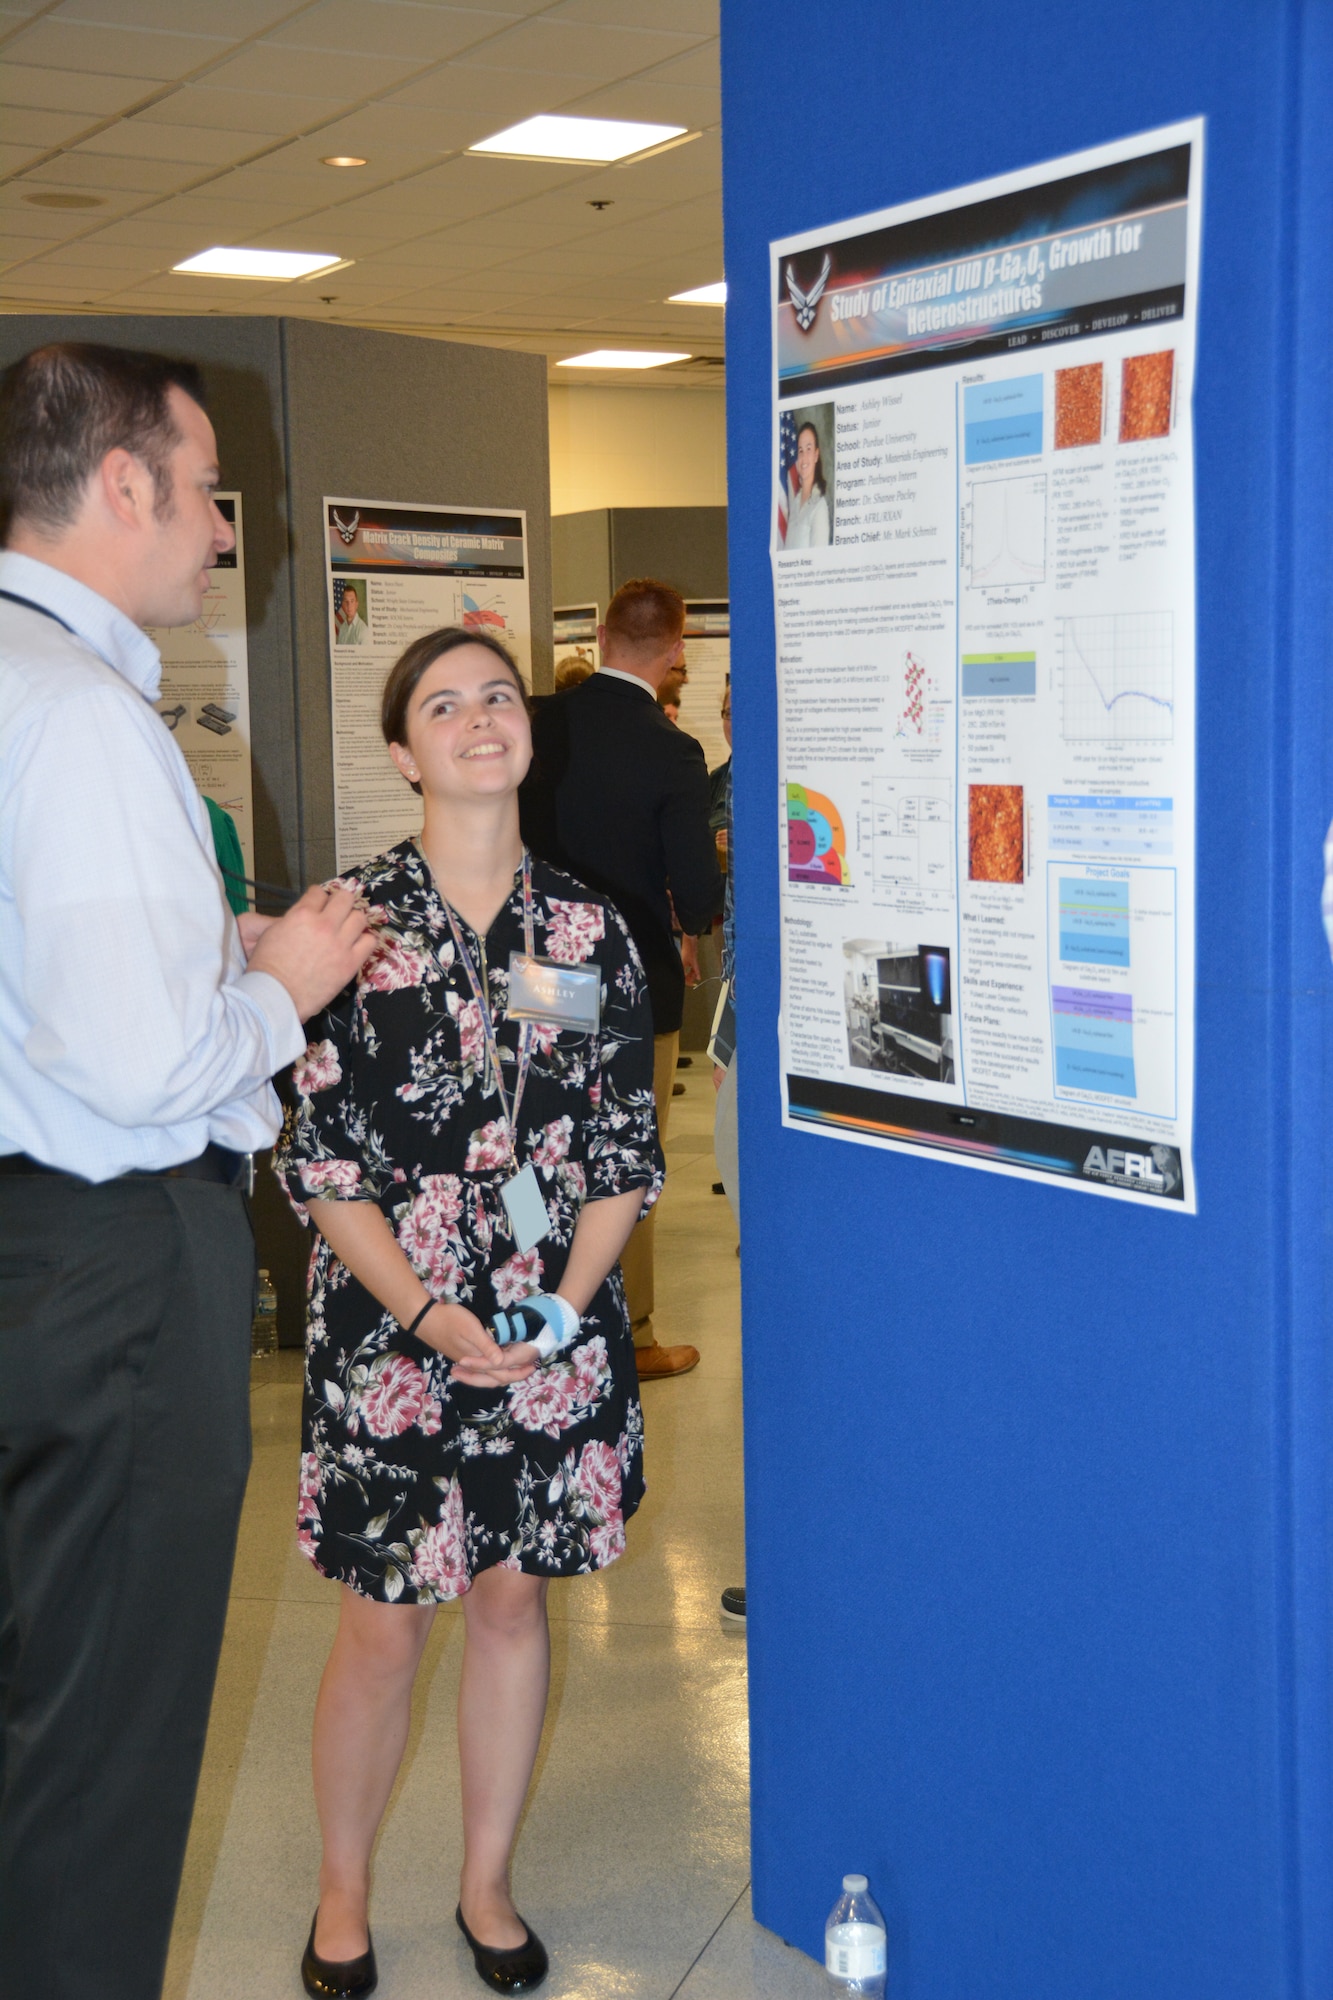 Ashley Wissel, Purdue University undergraduate student, displays her work performed over the summer at a poster session in the Air Force Research Laboratory Materials and Manufacturing Directorate attended by leadership, mentors and colleagues. (U.S. Air Force photo/Dave Dixon)